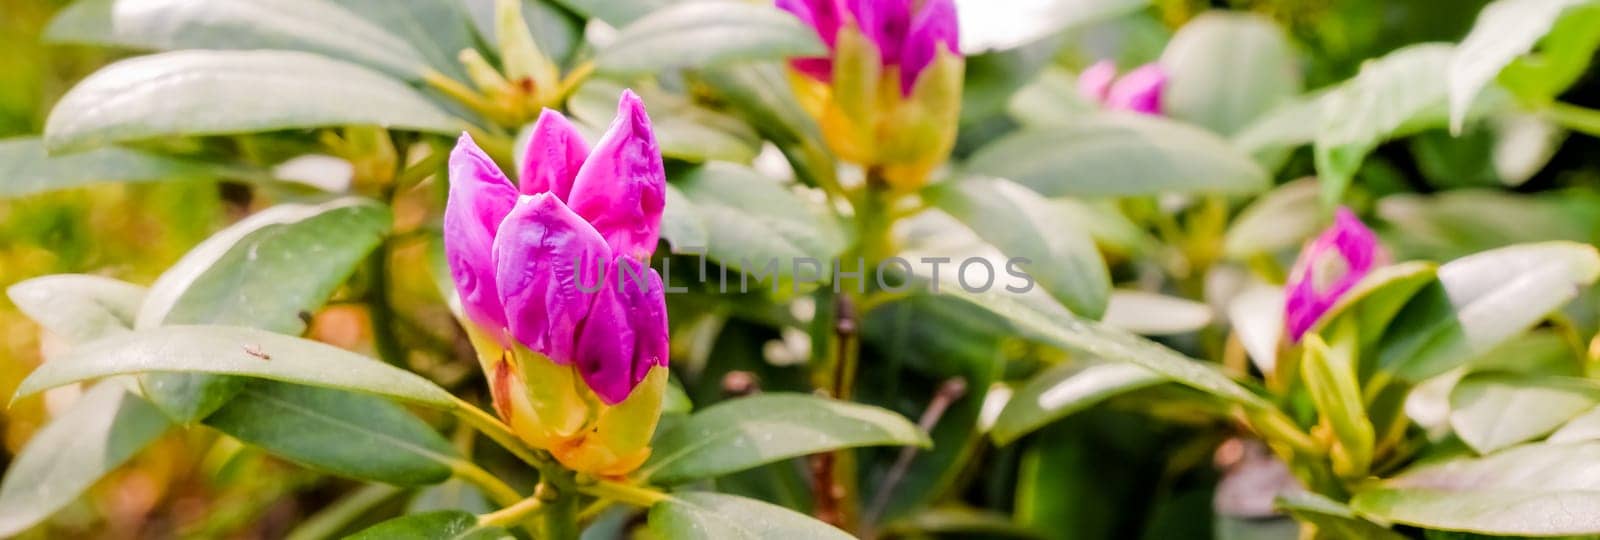 Blooming rhododendrons flowers. Summer time. Botanical garden.Pink coral Japanese rhododendron, lush flowering in the nursery of rhododendrons. by YuliaYaspe1979